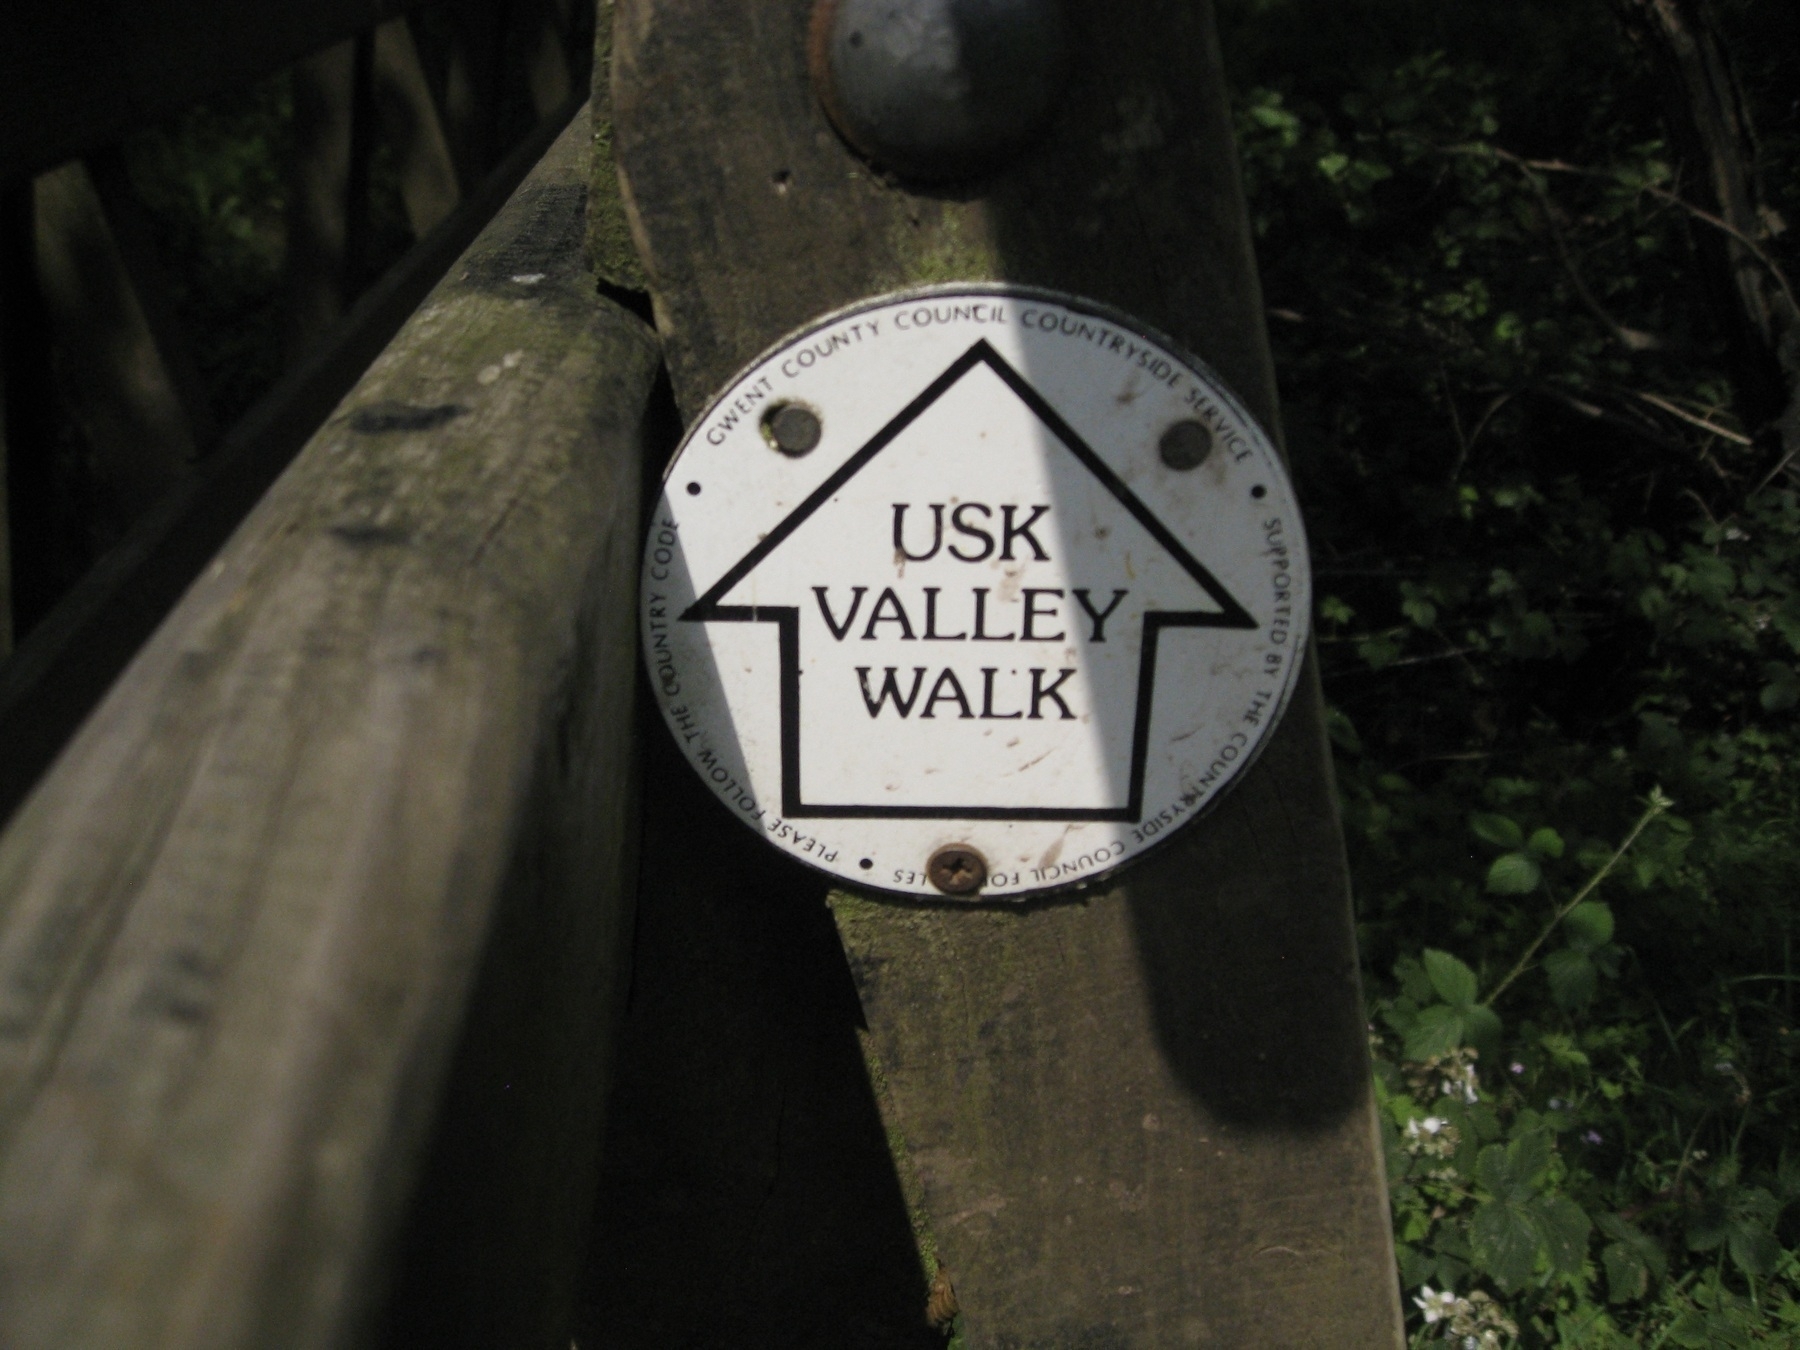 A sign on a post in South Wales pointing out the route for the Usk Valley Walk